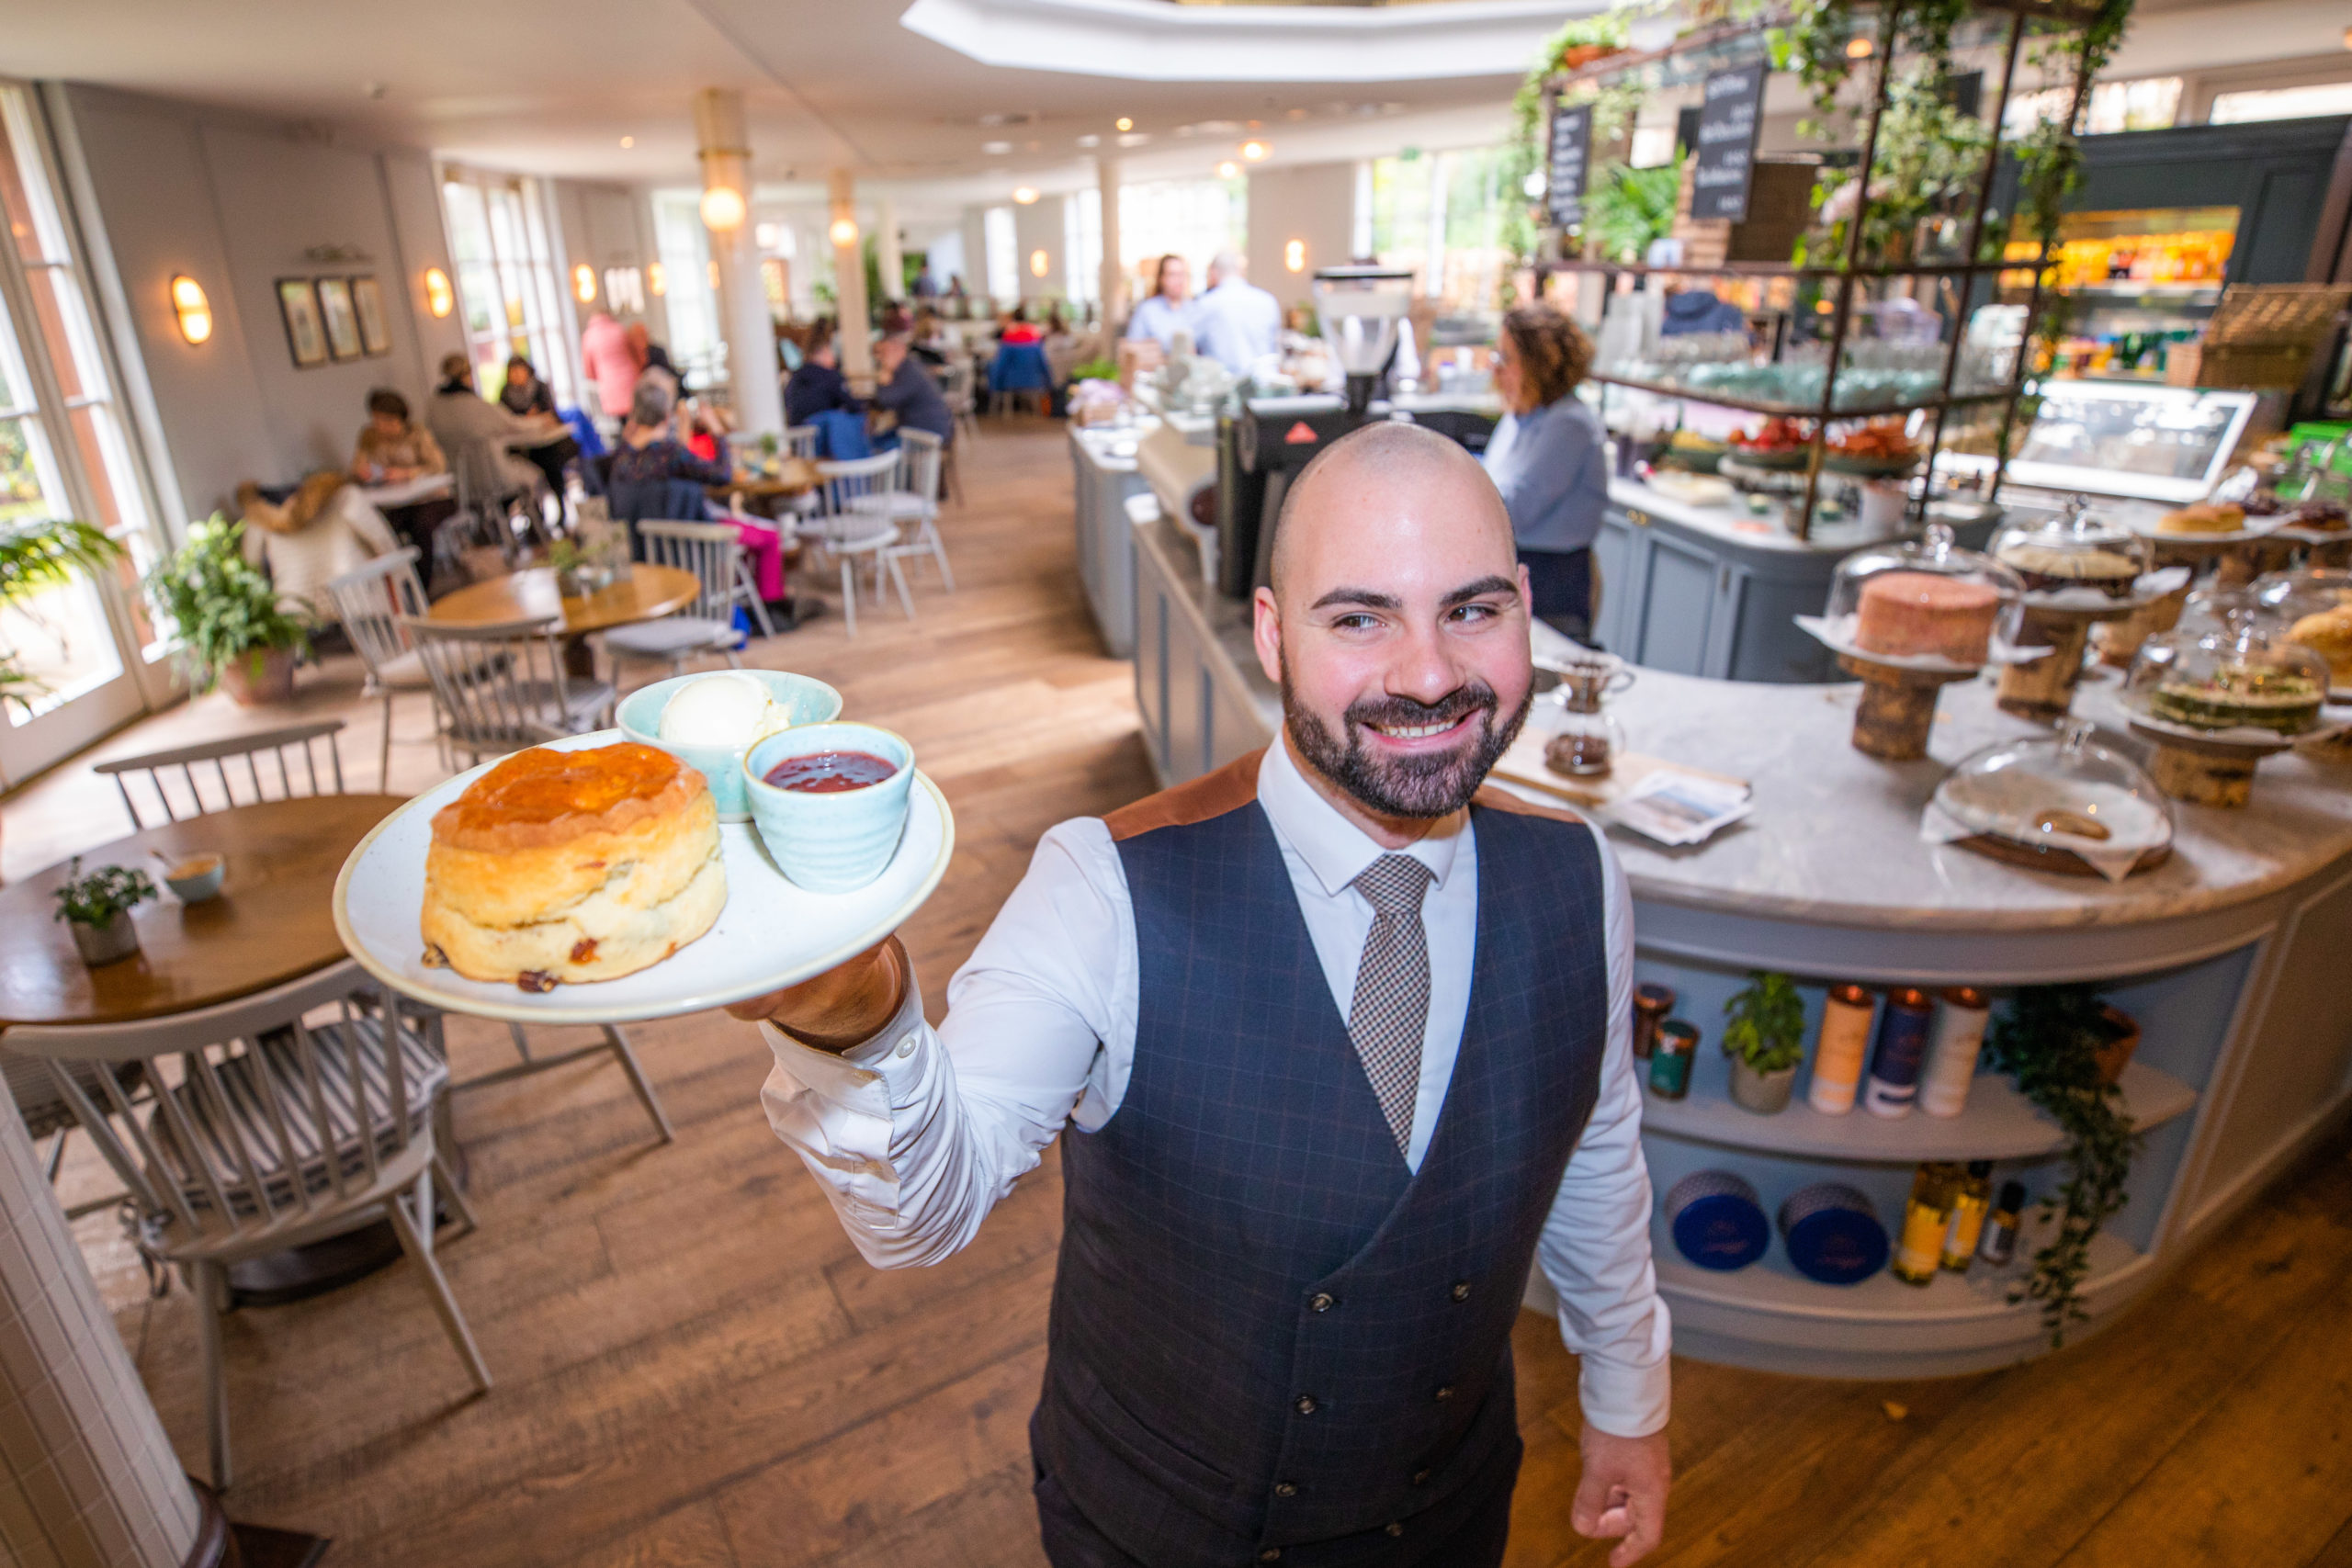 Senior supervisor Lorenzo Rinaldi delivers another supersized scone with clotted cream and jam at Gleneagles’ Garden Cafe